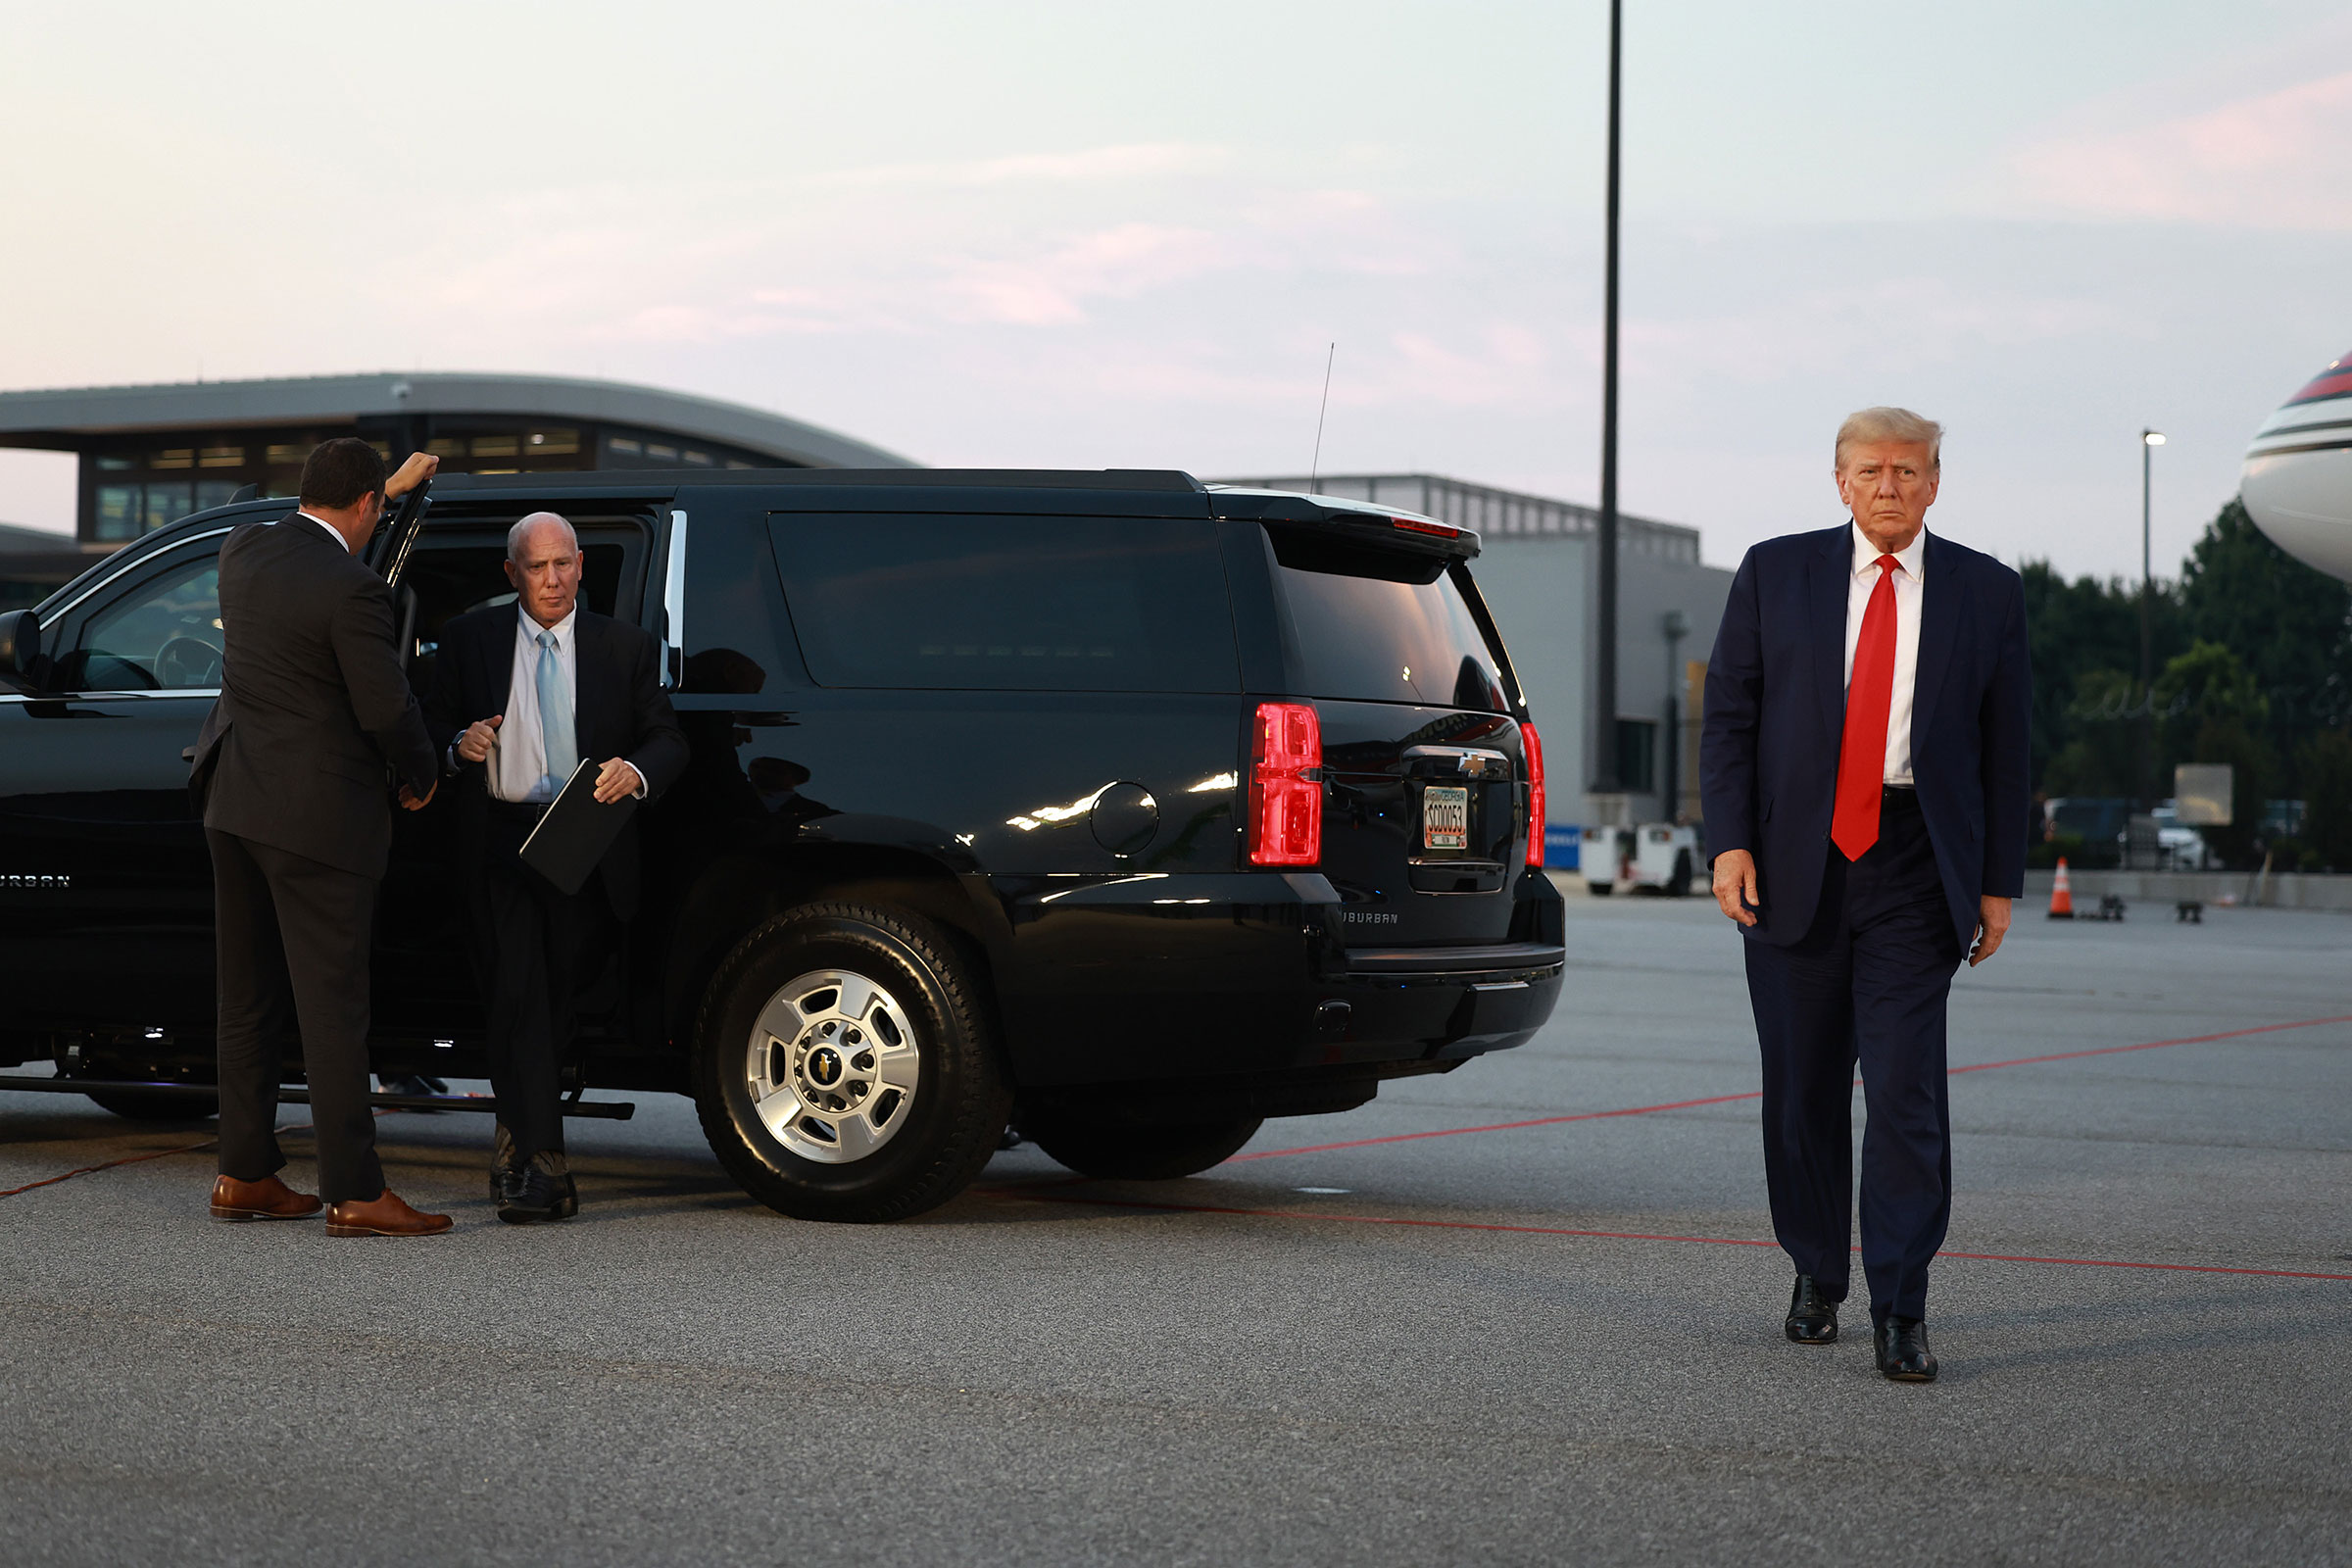 Former President Donald Trump and his lawyer, Steven Sadow, left, arrive at Atlanta Hartsfield-Jackson International Airport after being booked at the Fulton County jail on August 24, in Atlanta, Georgia.